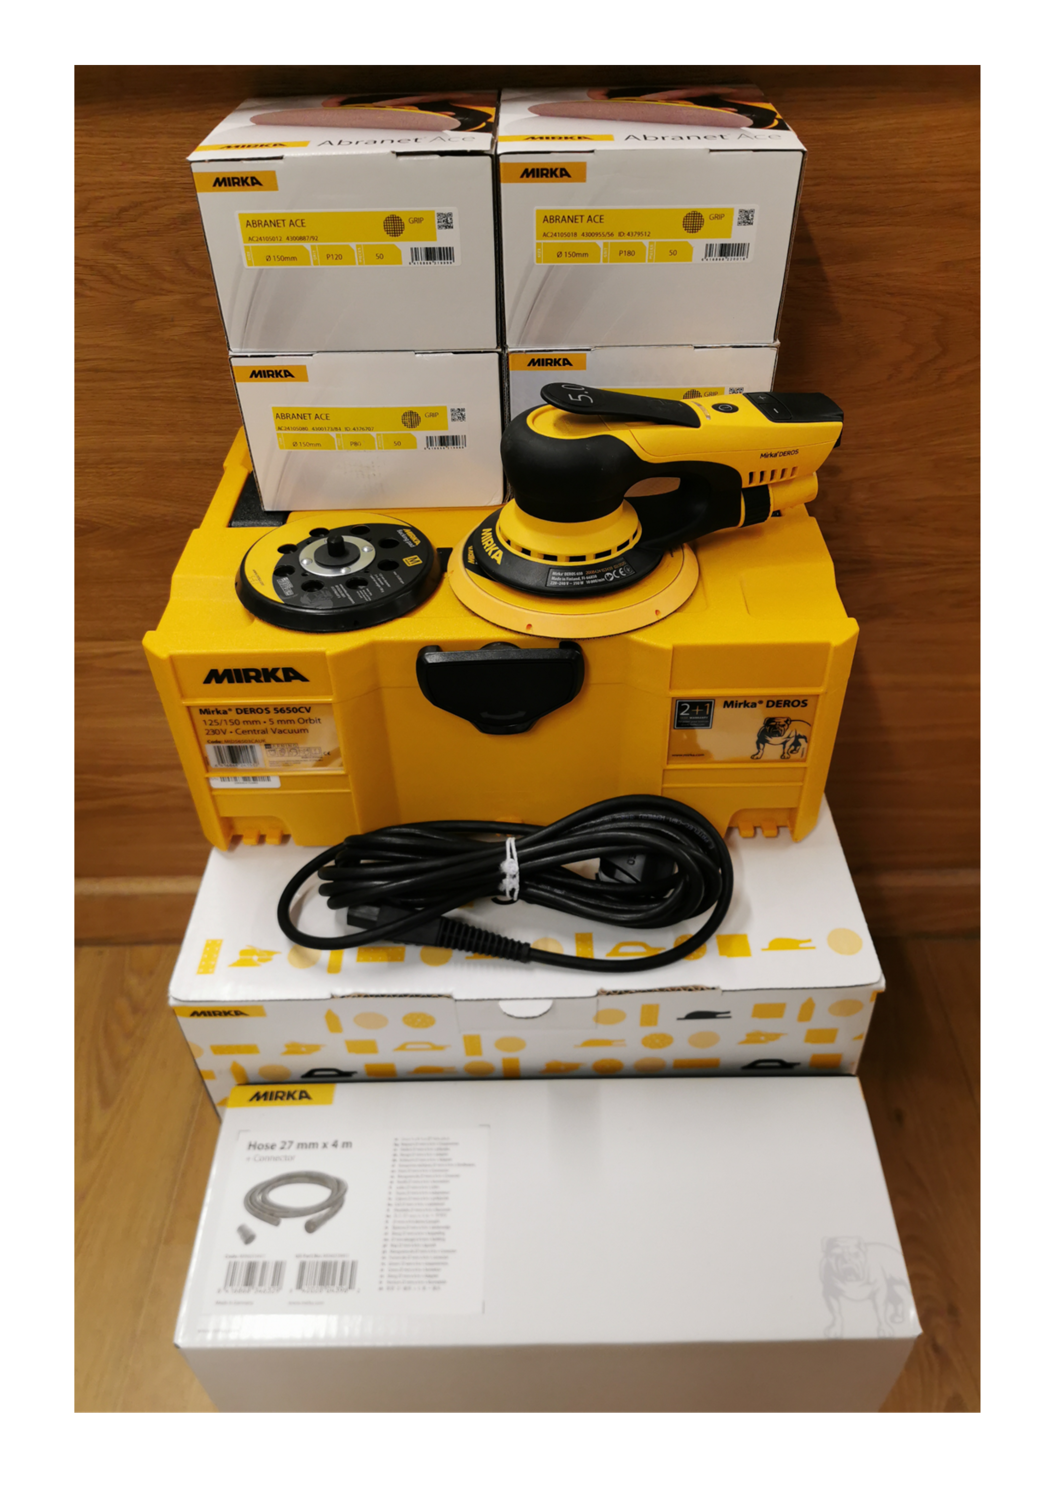 Mirka Deros Twin Head & 200 ACE Disc Sanding Kit. prices from